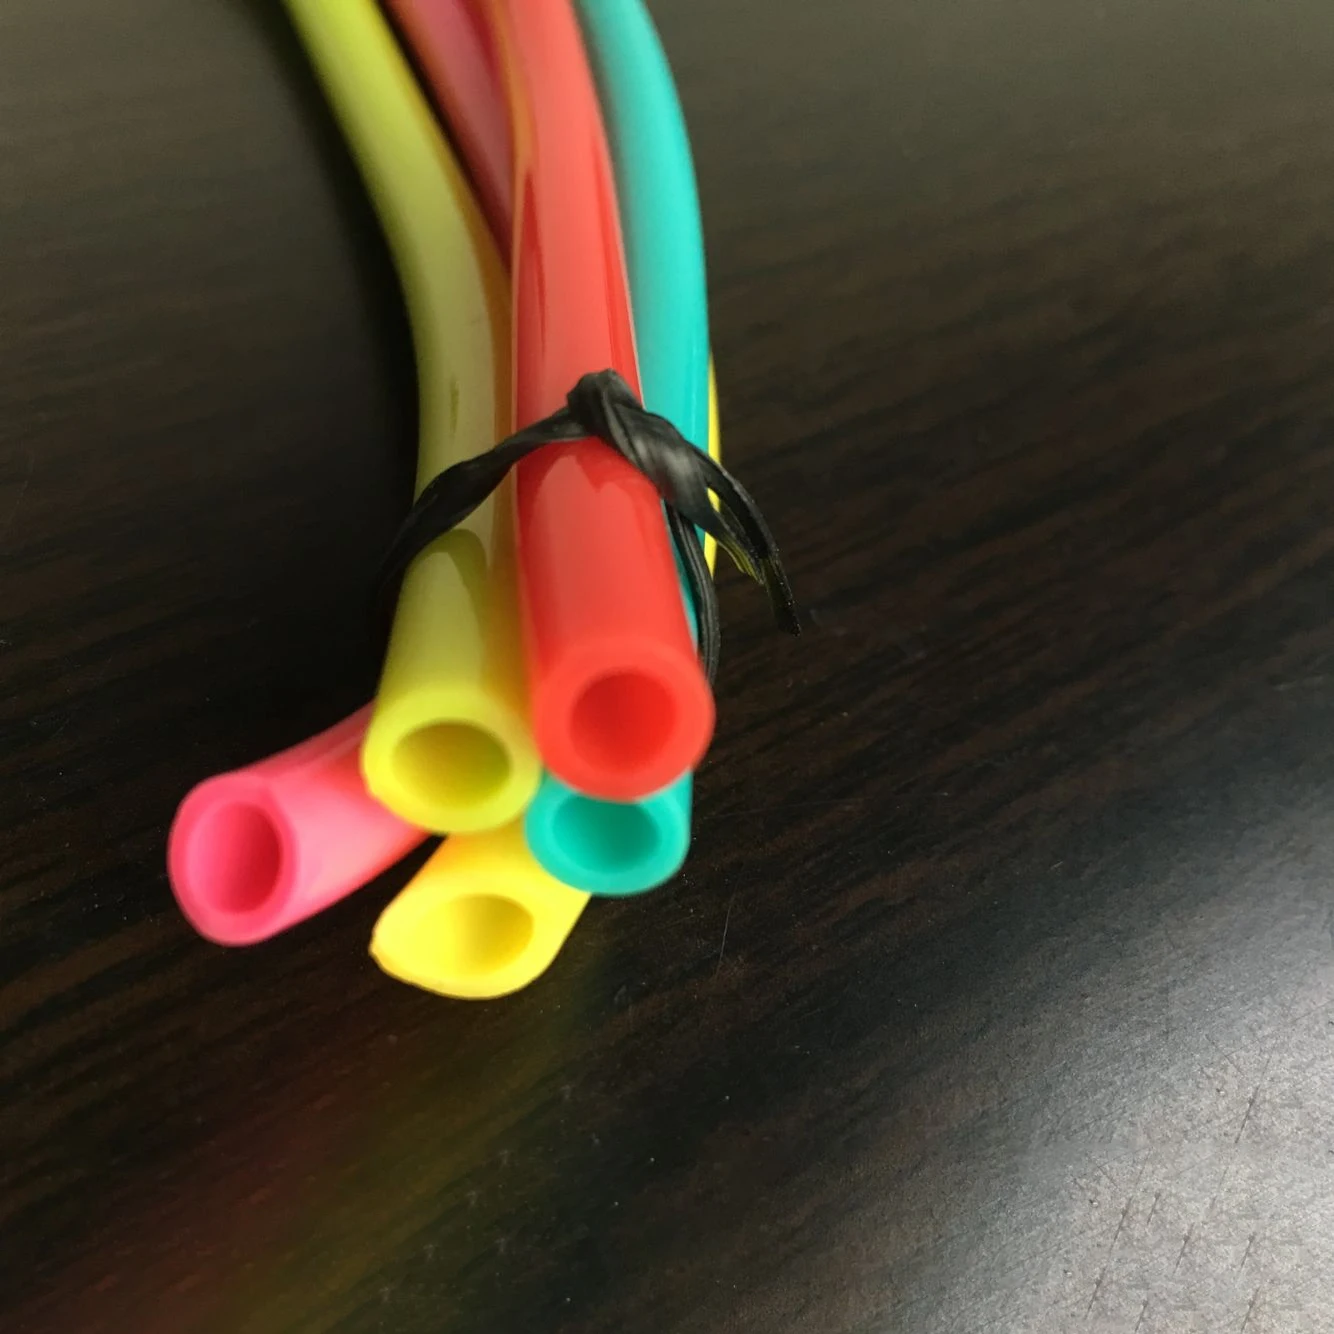 Oem Support Environmentally Friendly Silicone Hose Food Grade Pvc Pipe Pu Tpu Colored Plastic Tubing For Toy